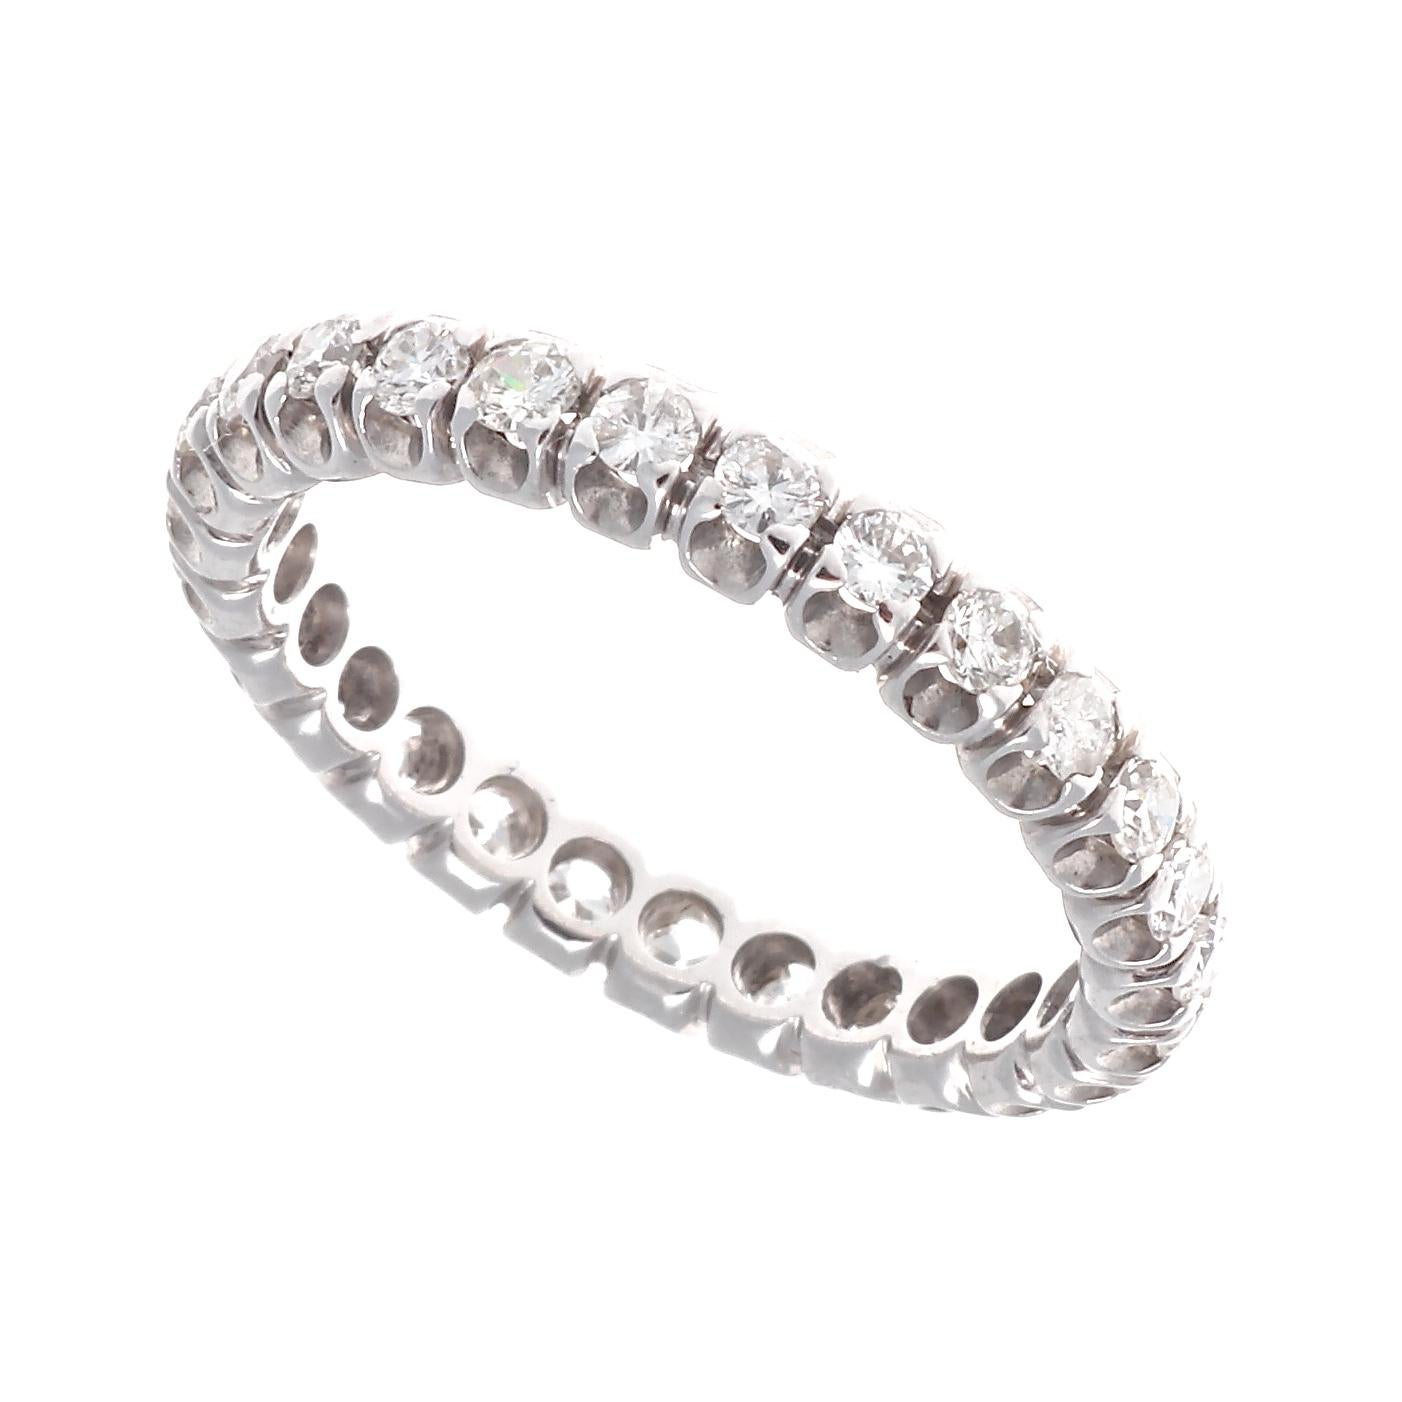 Eternity ring, also known as infinity ring, is designed as a symbol of everlasting love as well as the ‘eternity’ a couple plan to share together. Designed with numerous near colorless diamonds orbiting the elegantly crafted 18k gold ring. Ring size